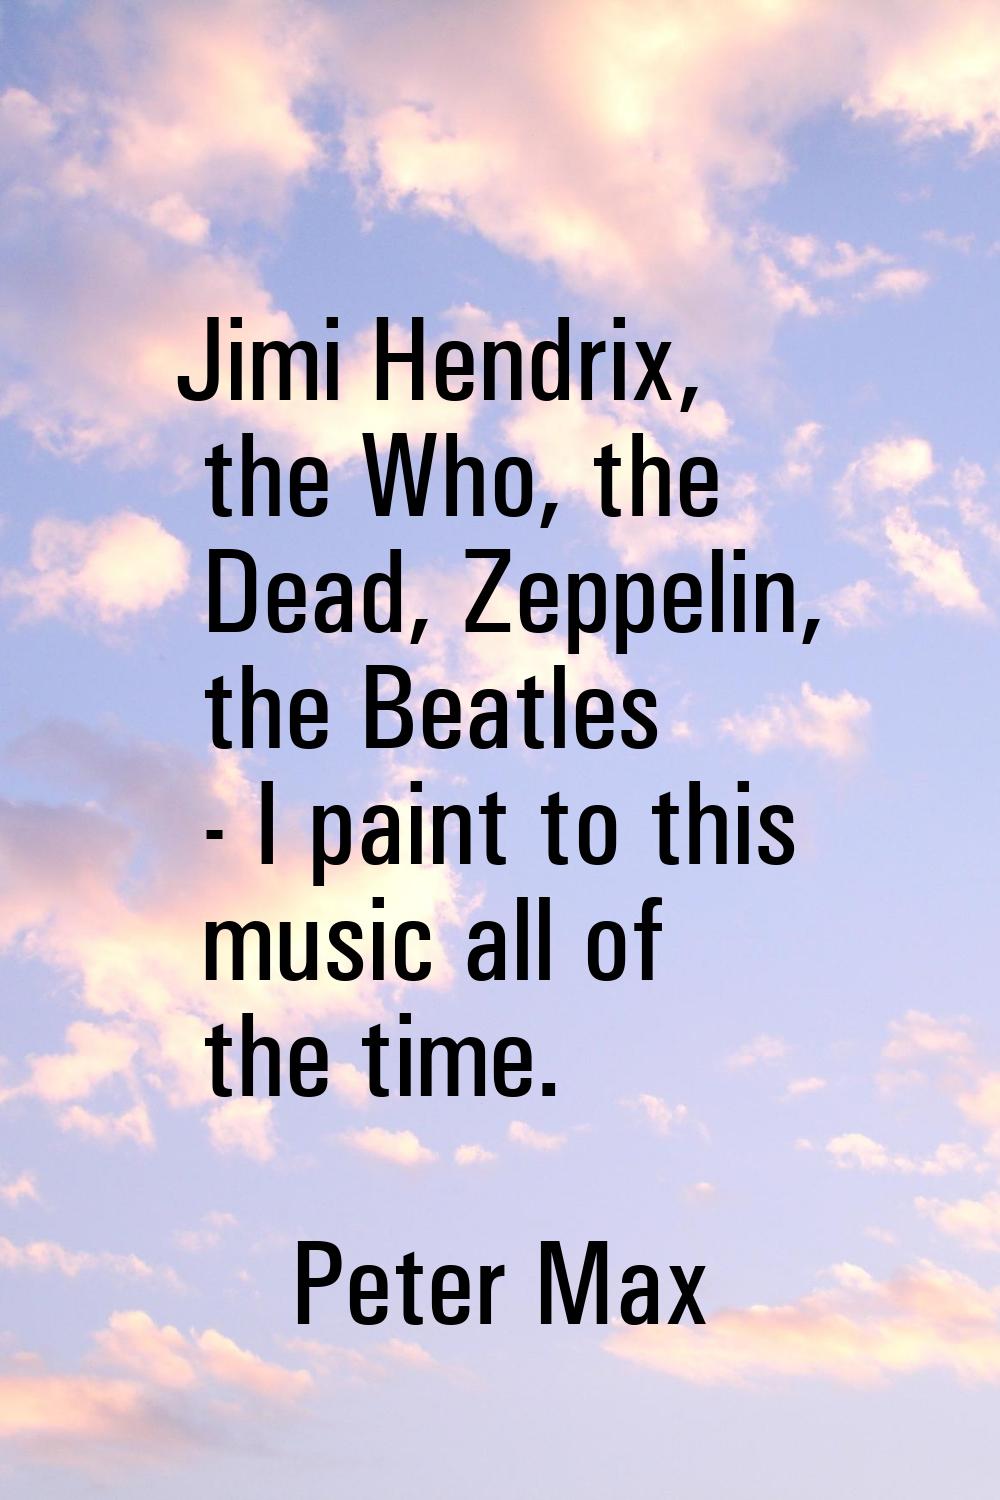 Jimi Hendrix, the Who, the Dead, Zeppelin, the Beatles - I paint to this music all of the time.